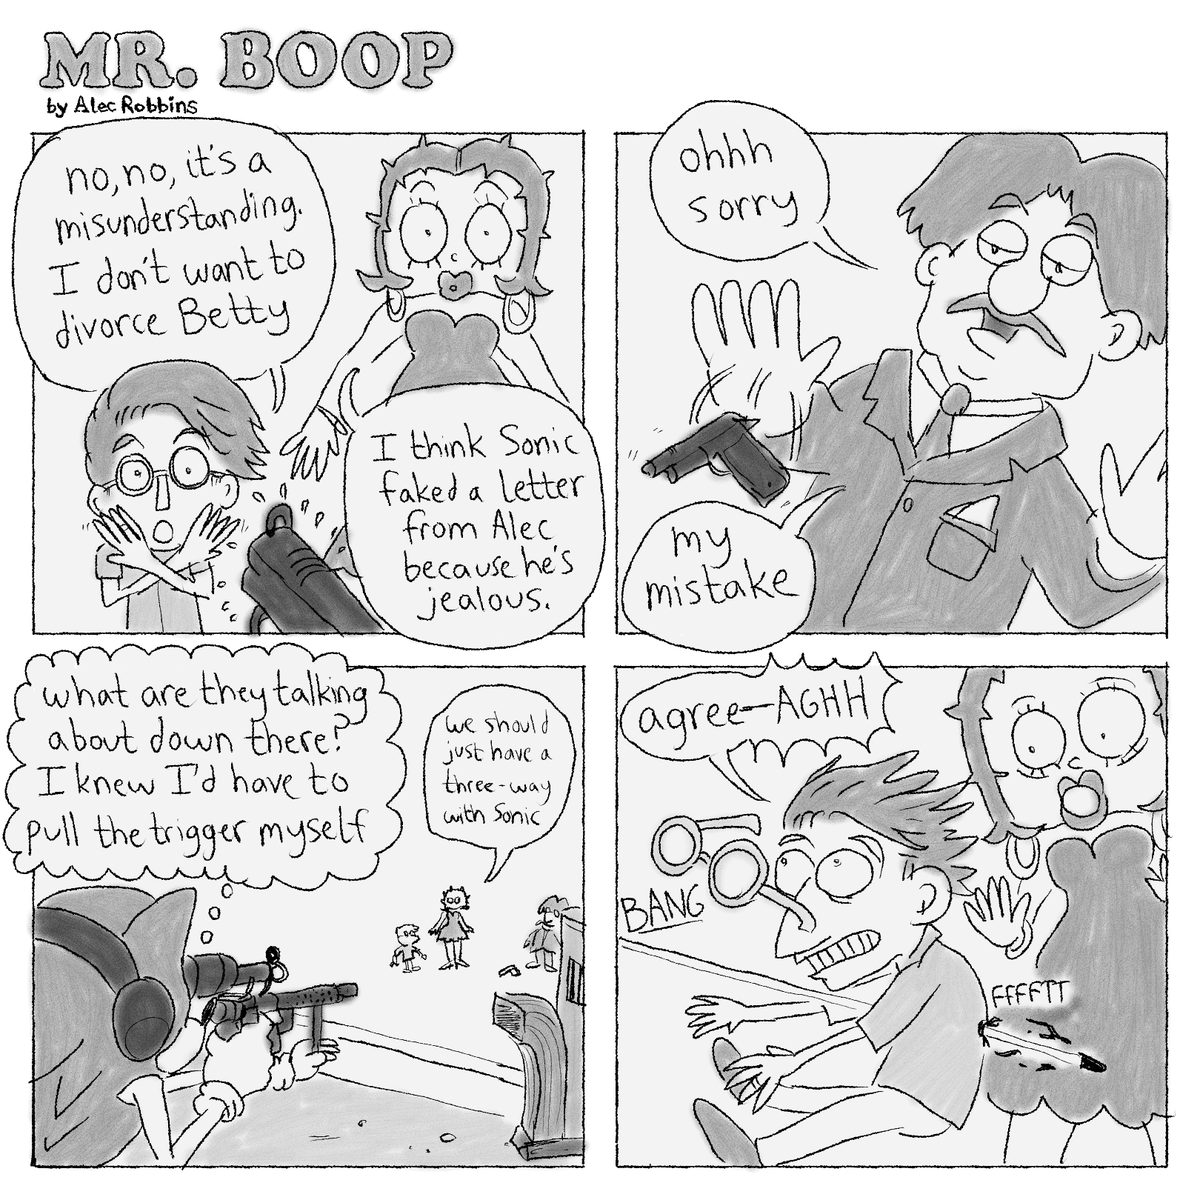 E N D  OF  B O O P  I(don't worry, mr. boop will continue onward uninterrupted tomorrow morning with more daily comics as usual... please stay tuned for an exciting Book Preorder Announcement...)